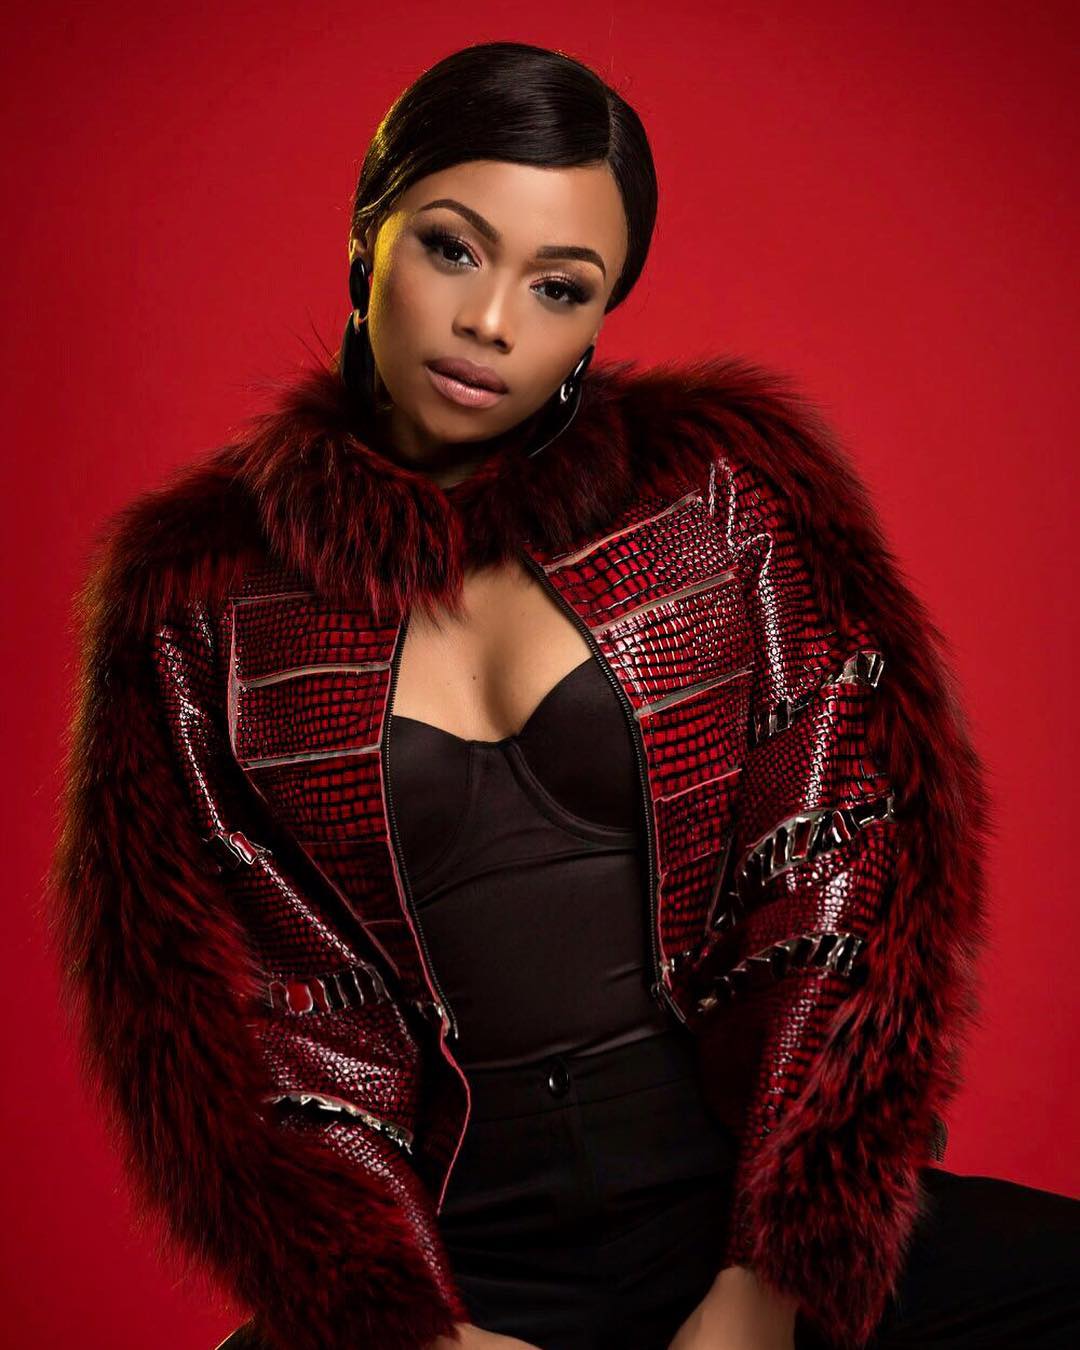 Here is Bonang Matheba’s message to her fans